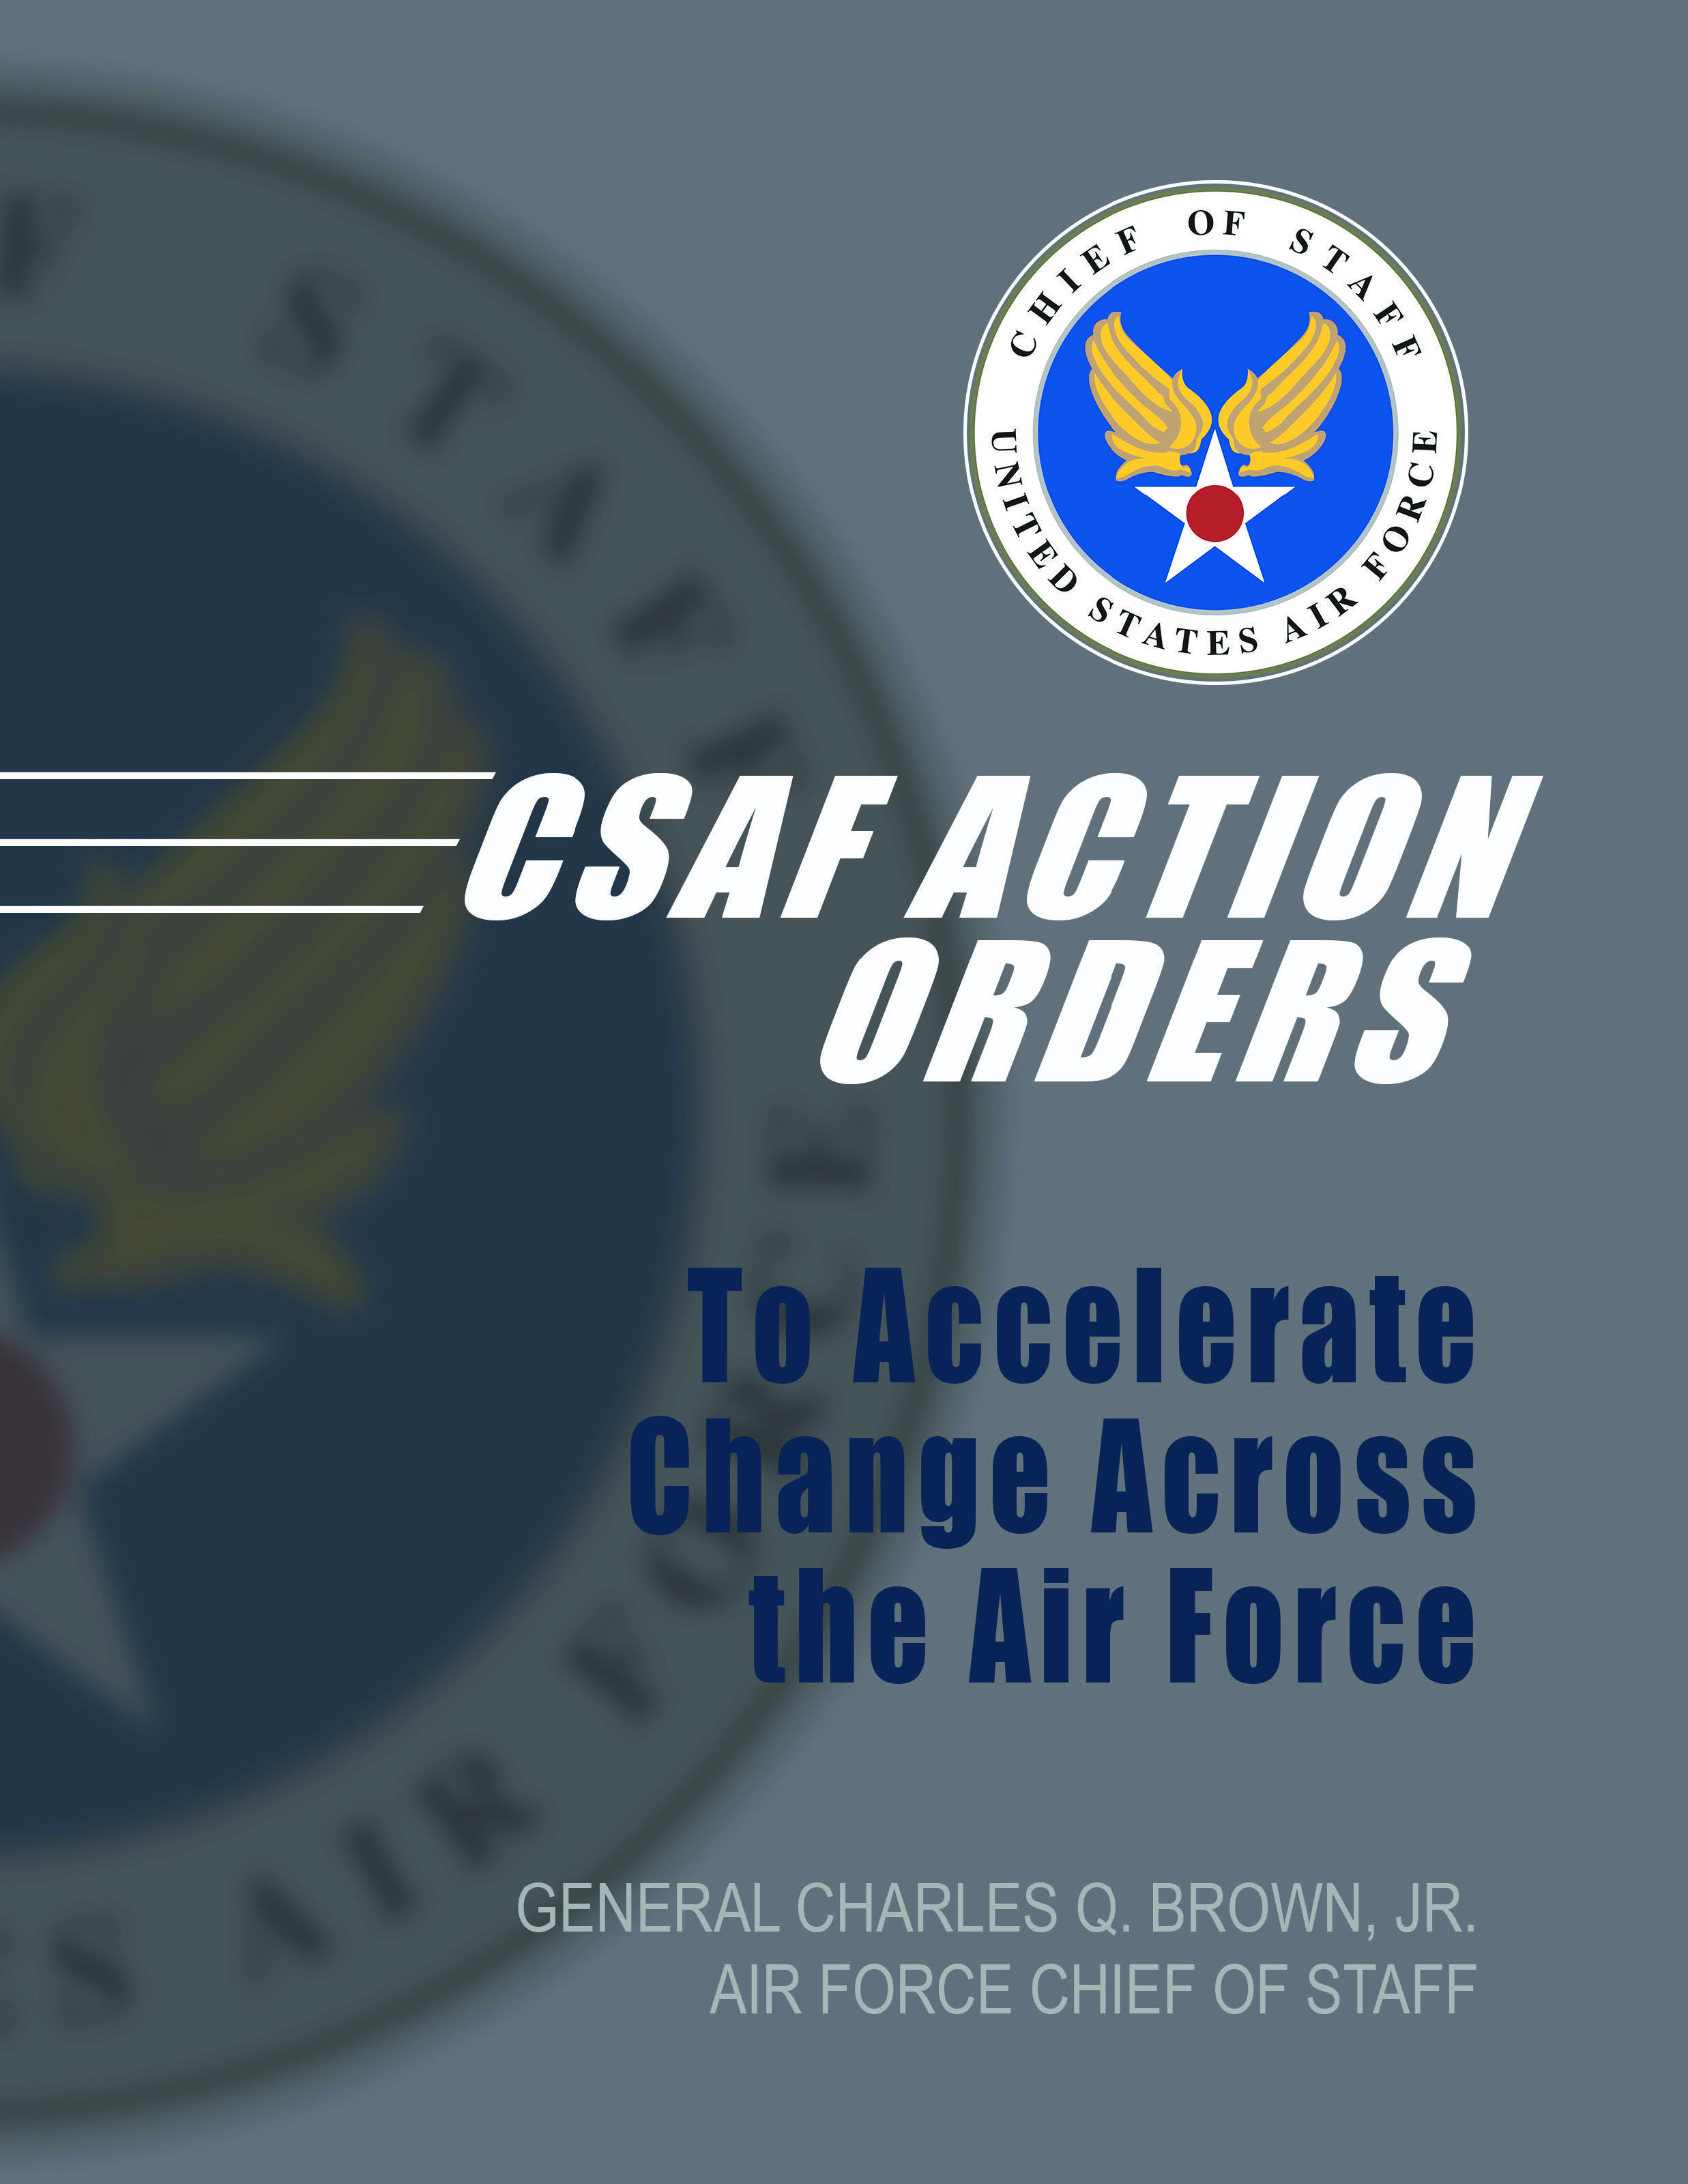 CSAF Action Orders with CSAF logo in background